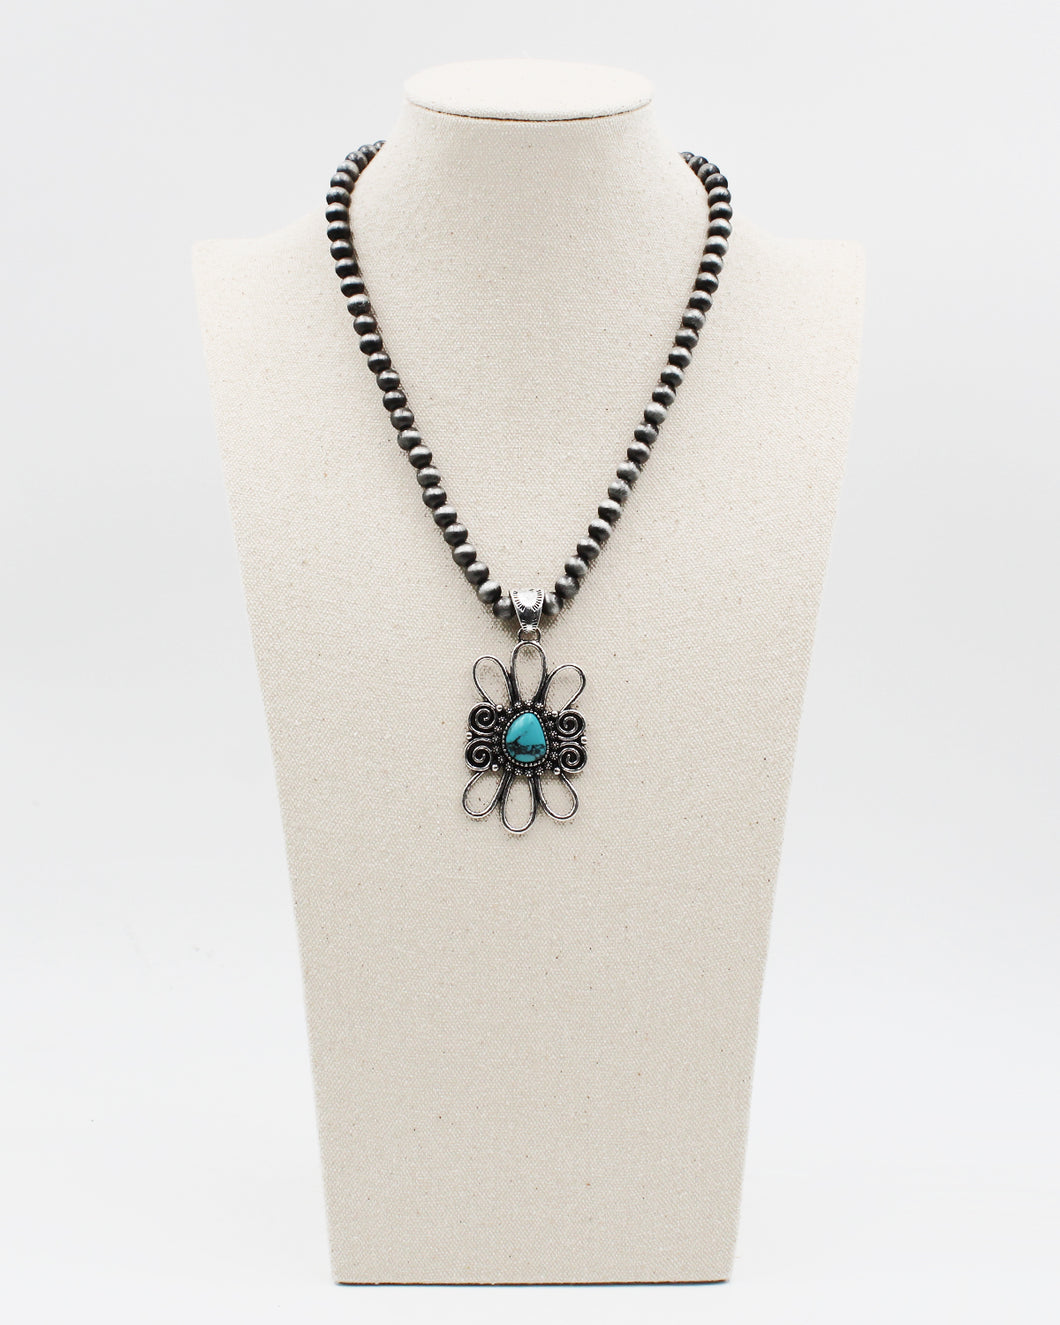 Southwestern Pendant Necklace with Metal Beads